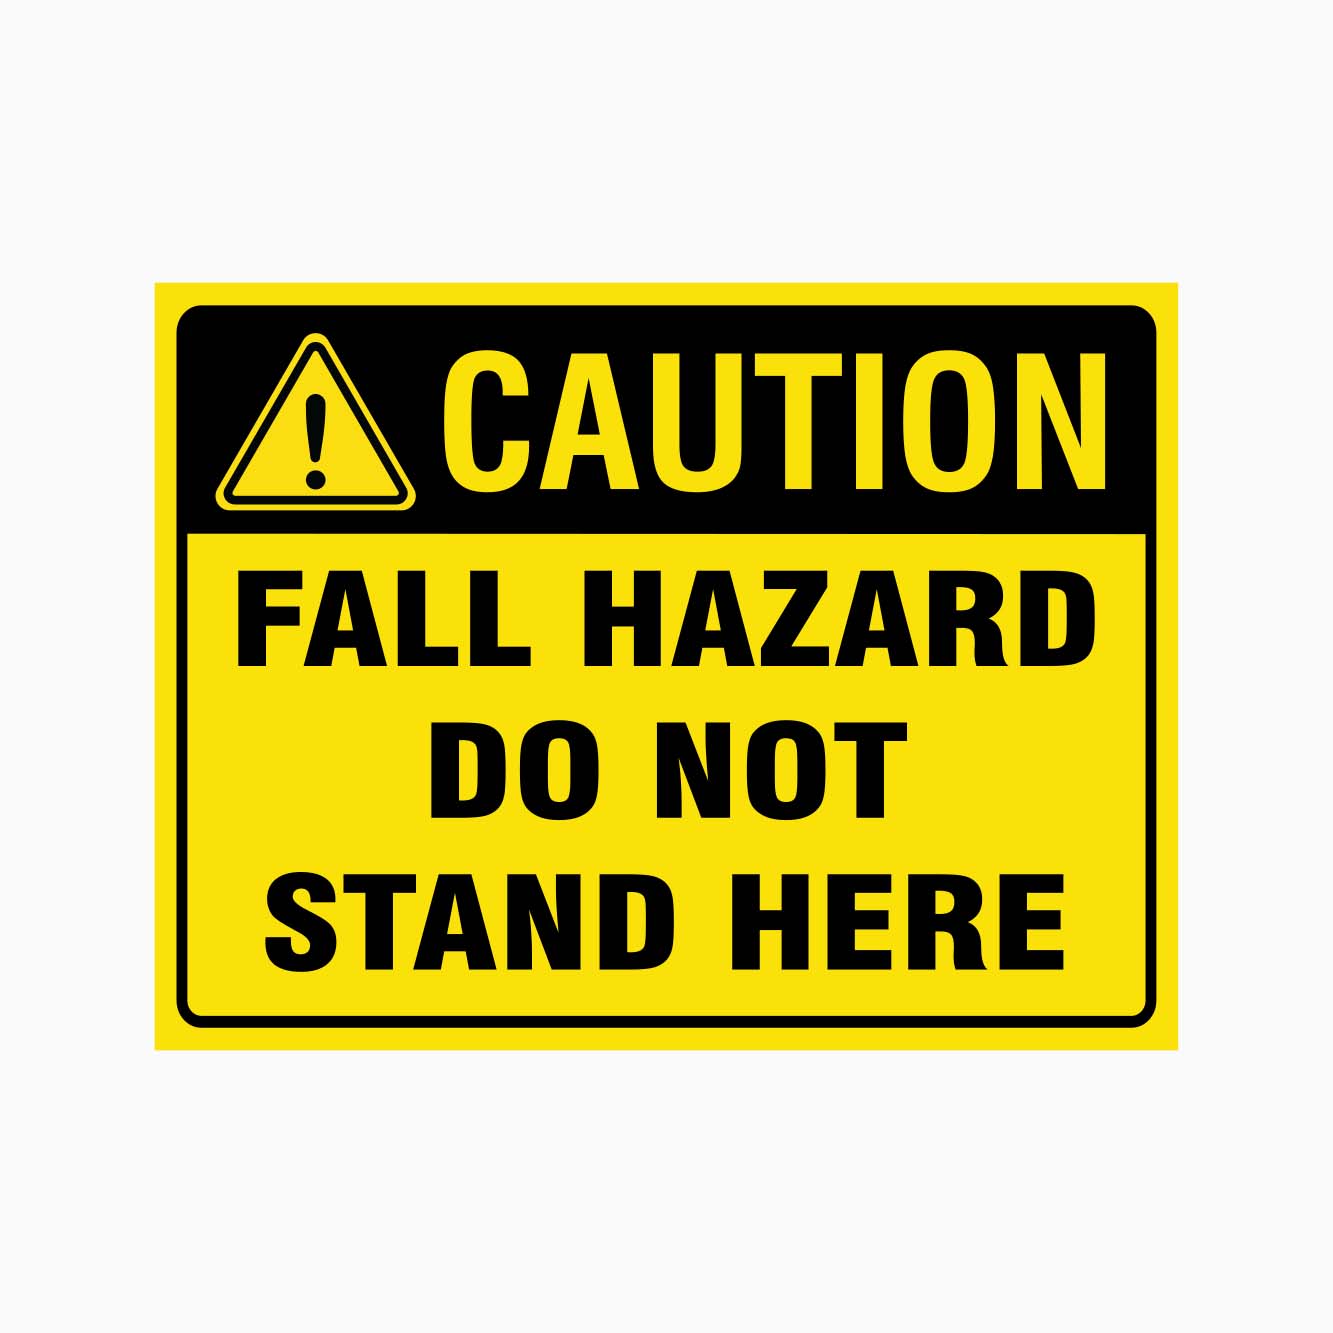 CAUTION FALL HAZARD DO NOT STAND HERE SIGN - GET SIGNS